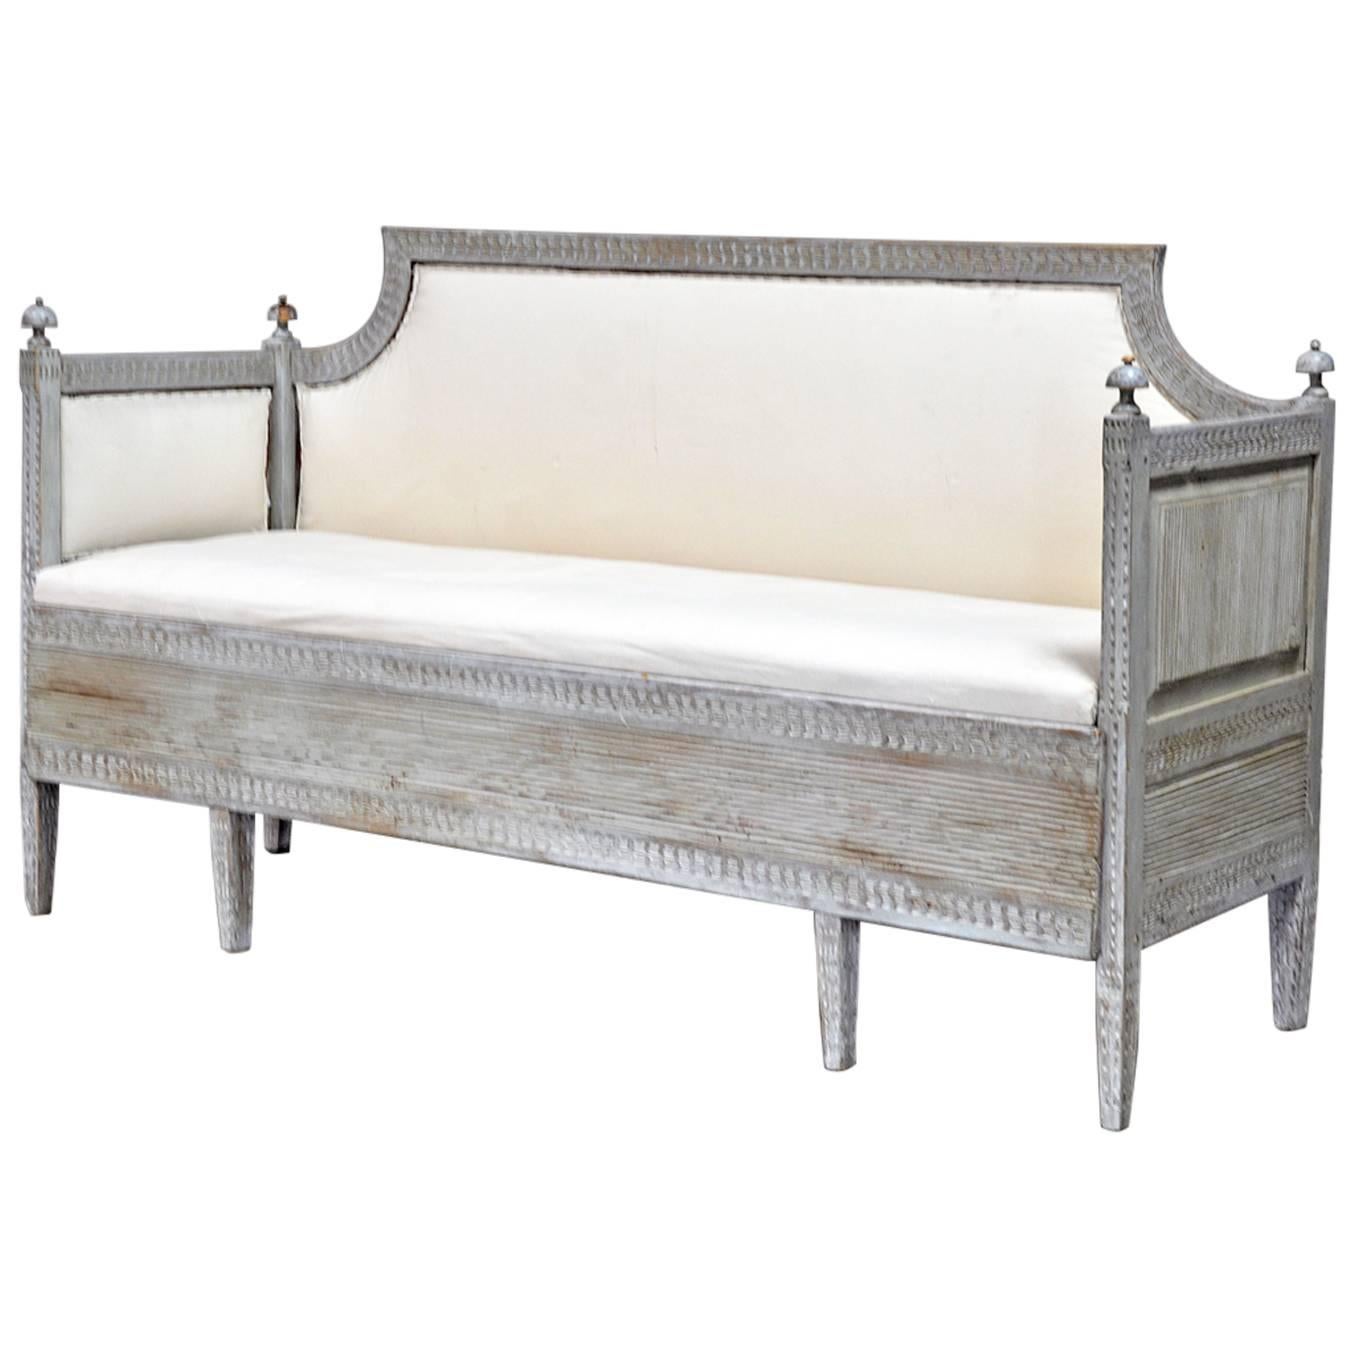 Swedish Daybed with Original and Functioning Trundle